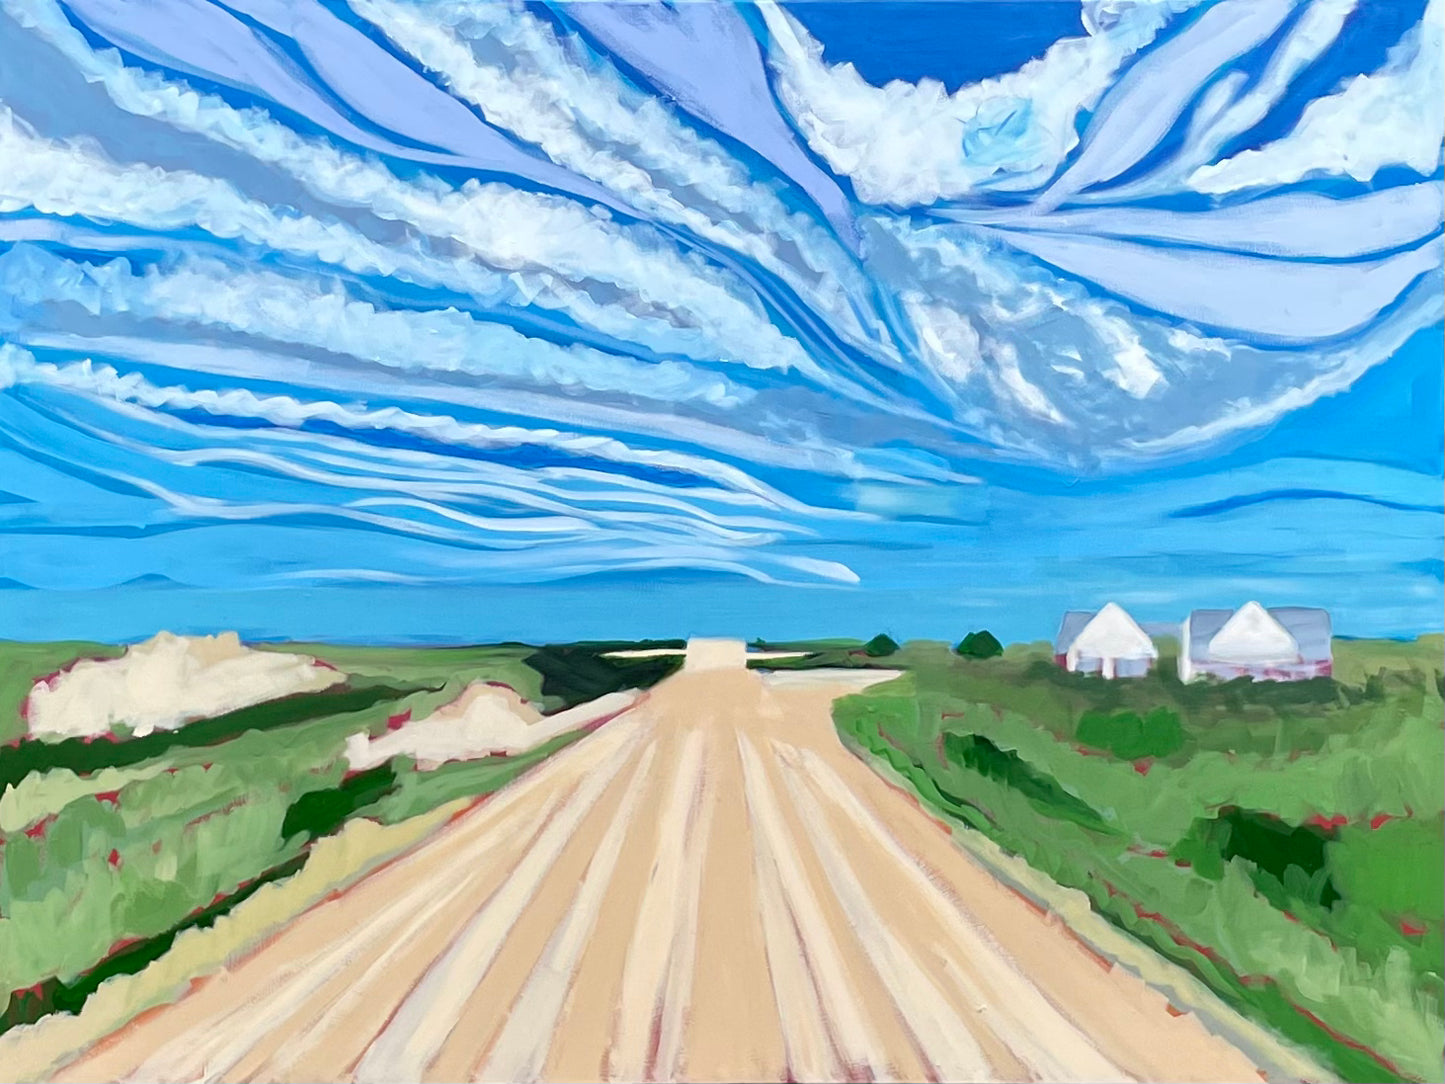 Painting of summer dirt road scene in Oklahoma with a country home and wild, active, swirling blue sky.  Main colors are blue and green.  Painting is called Summer in the City, referring to Oklahoma City.